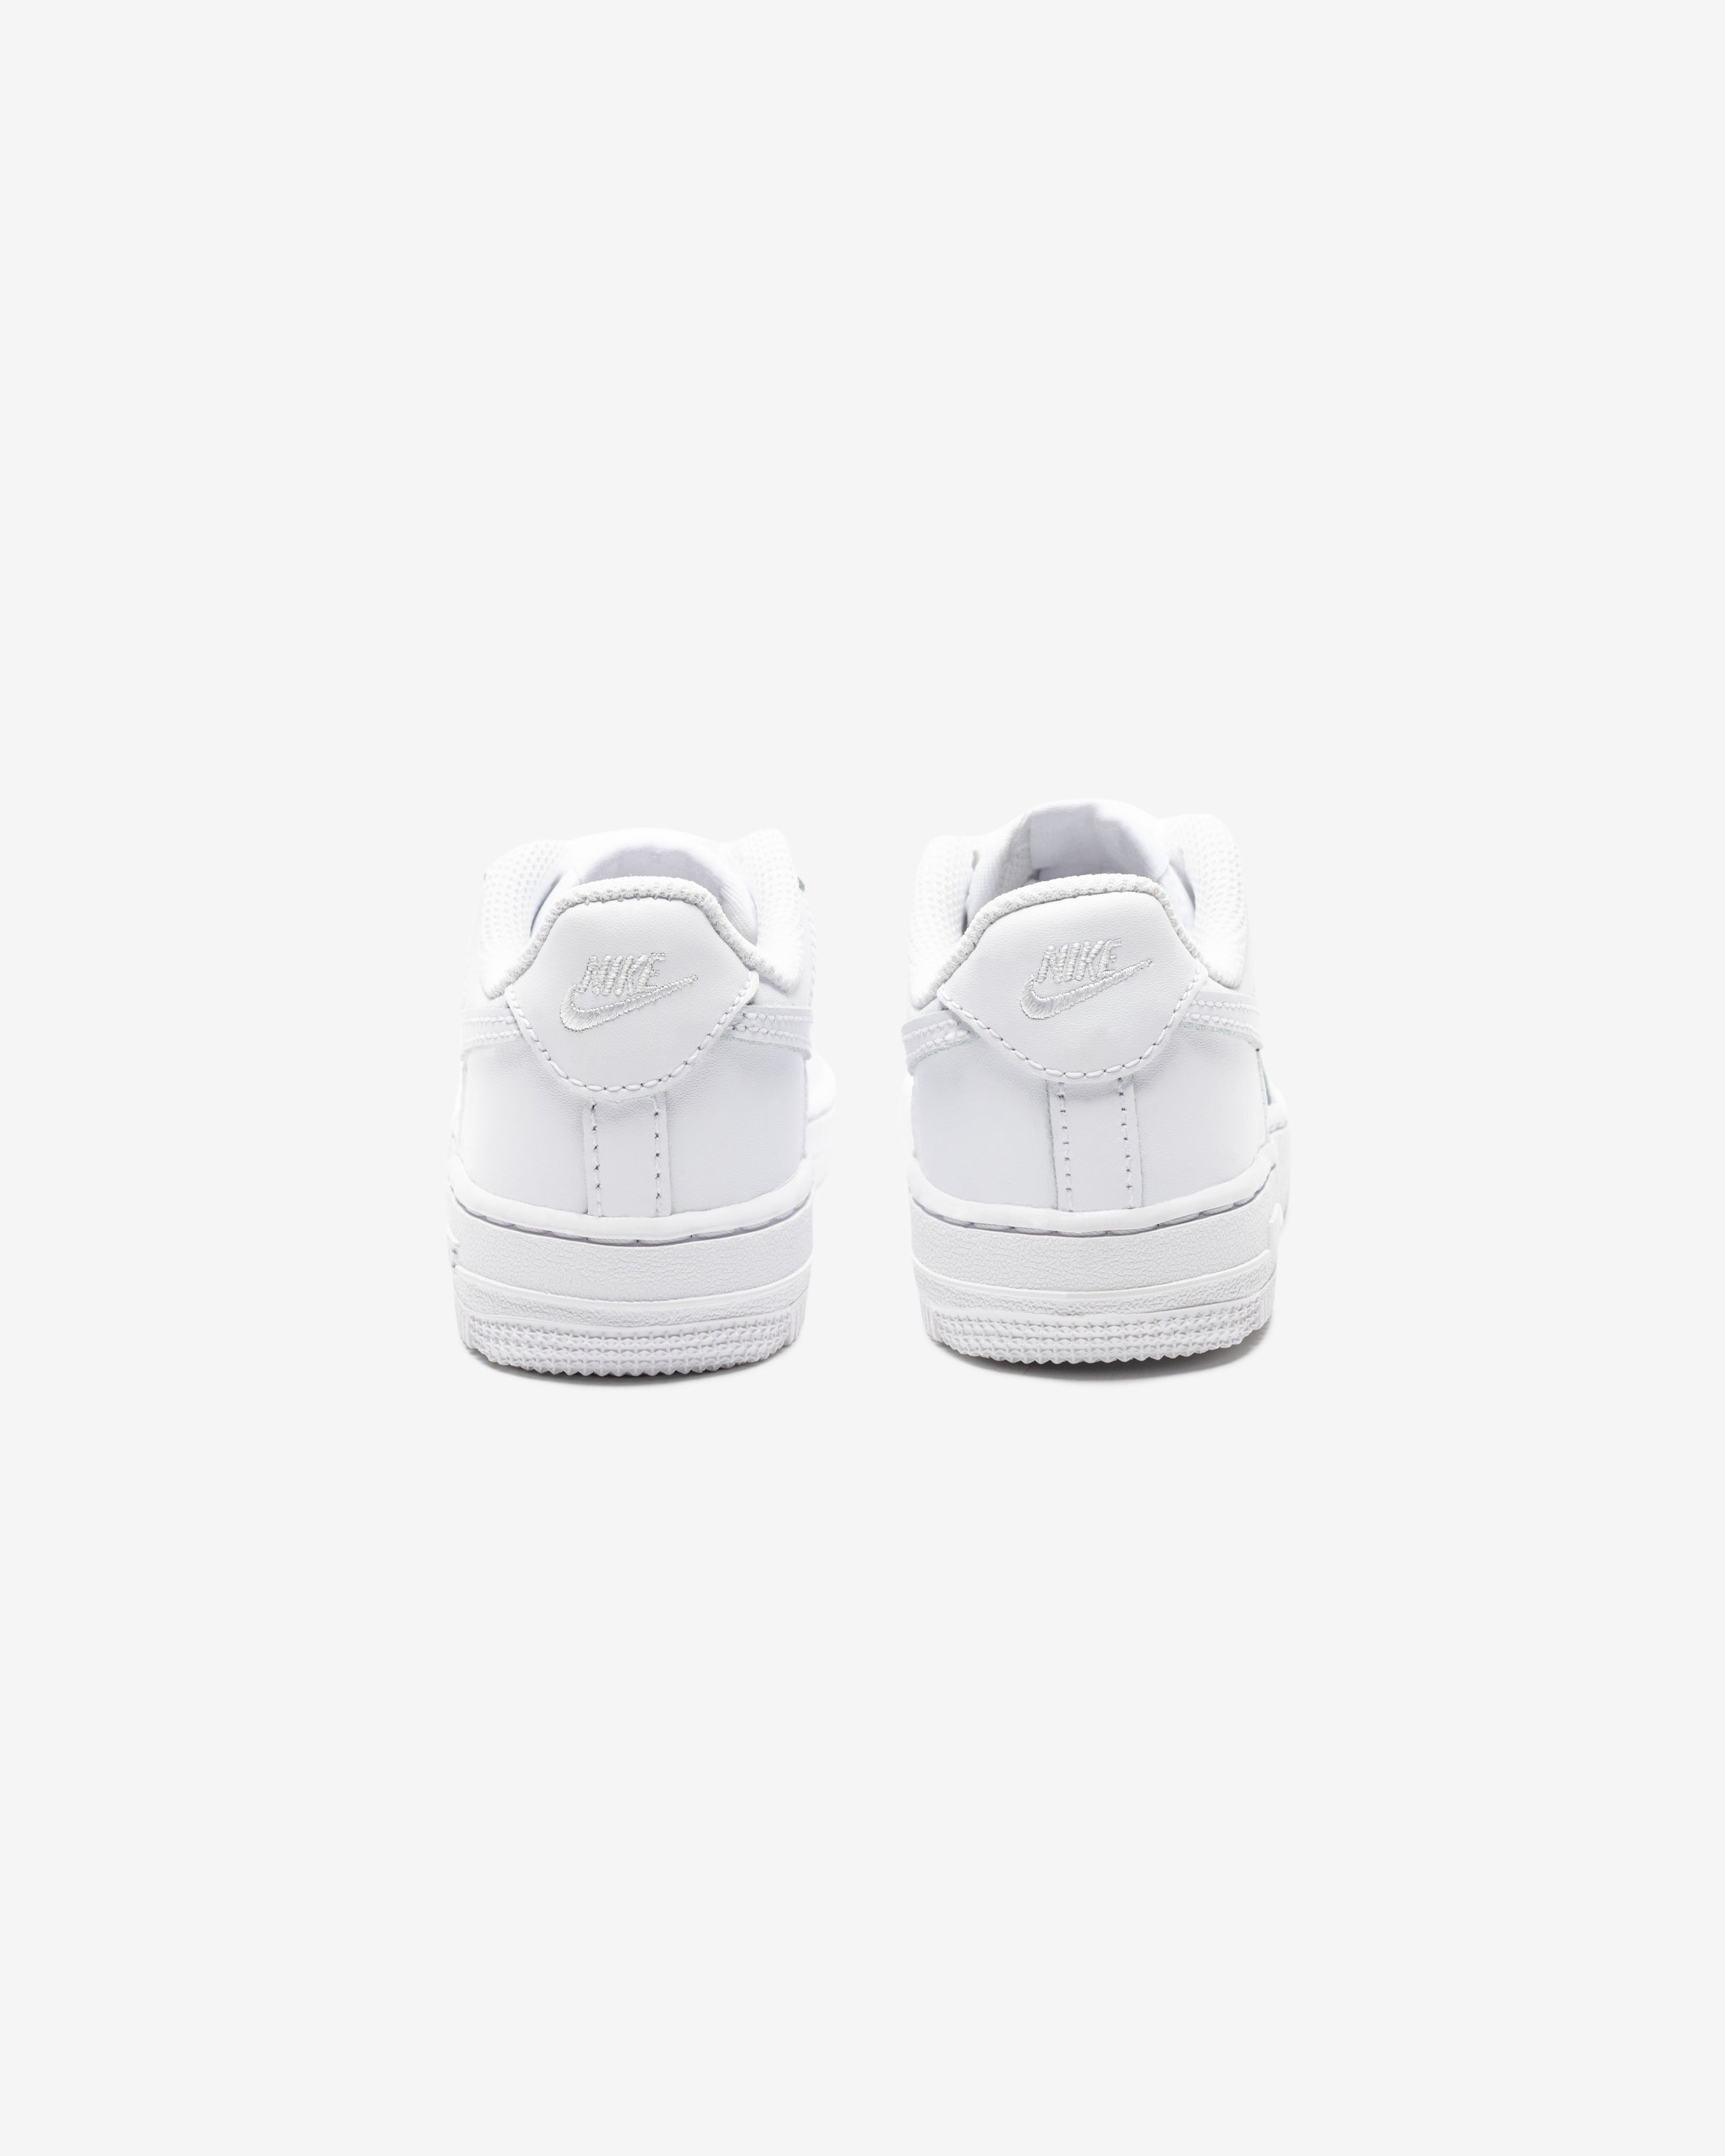 NIKE PS FORCE 1 LE - WHITE